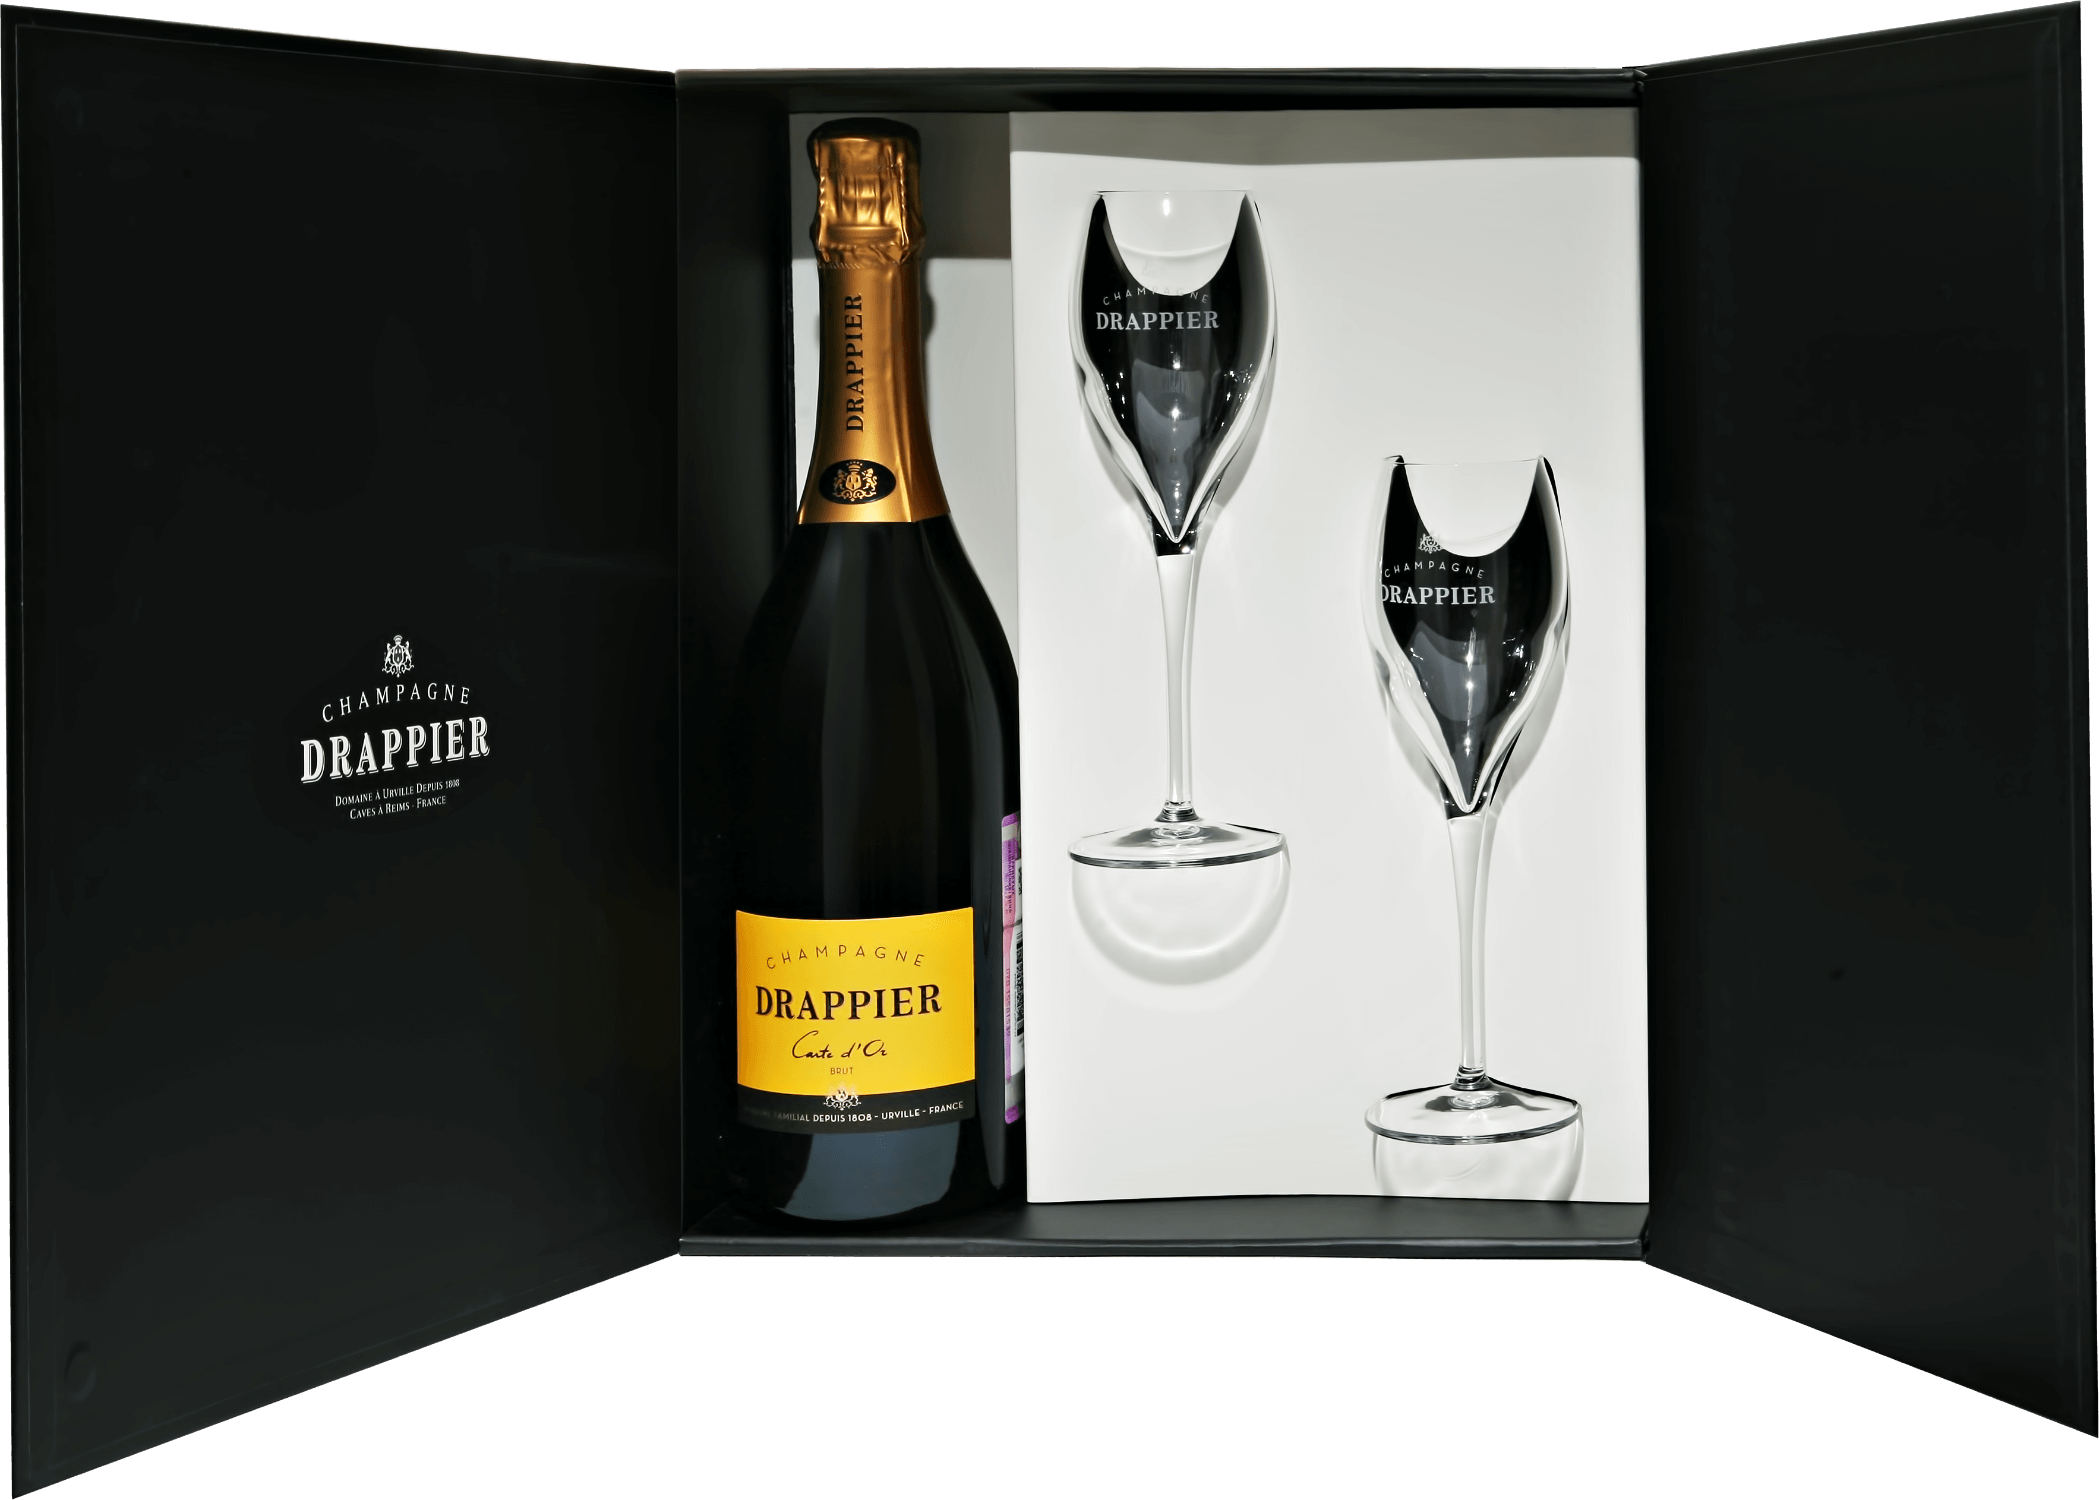 Drappier Carte d’Or Brut Champagne AOP in gift box with two glasses drappier carte d’or brut champagne aop in gift box with two glasses